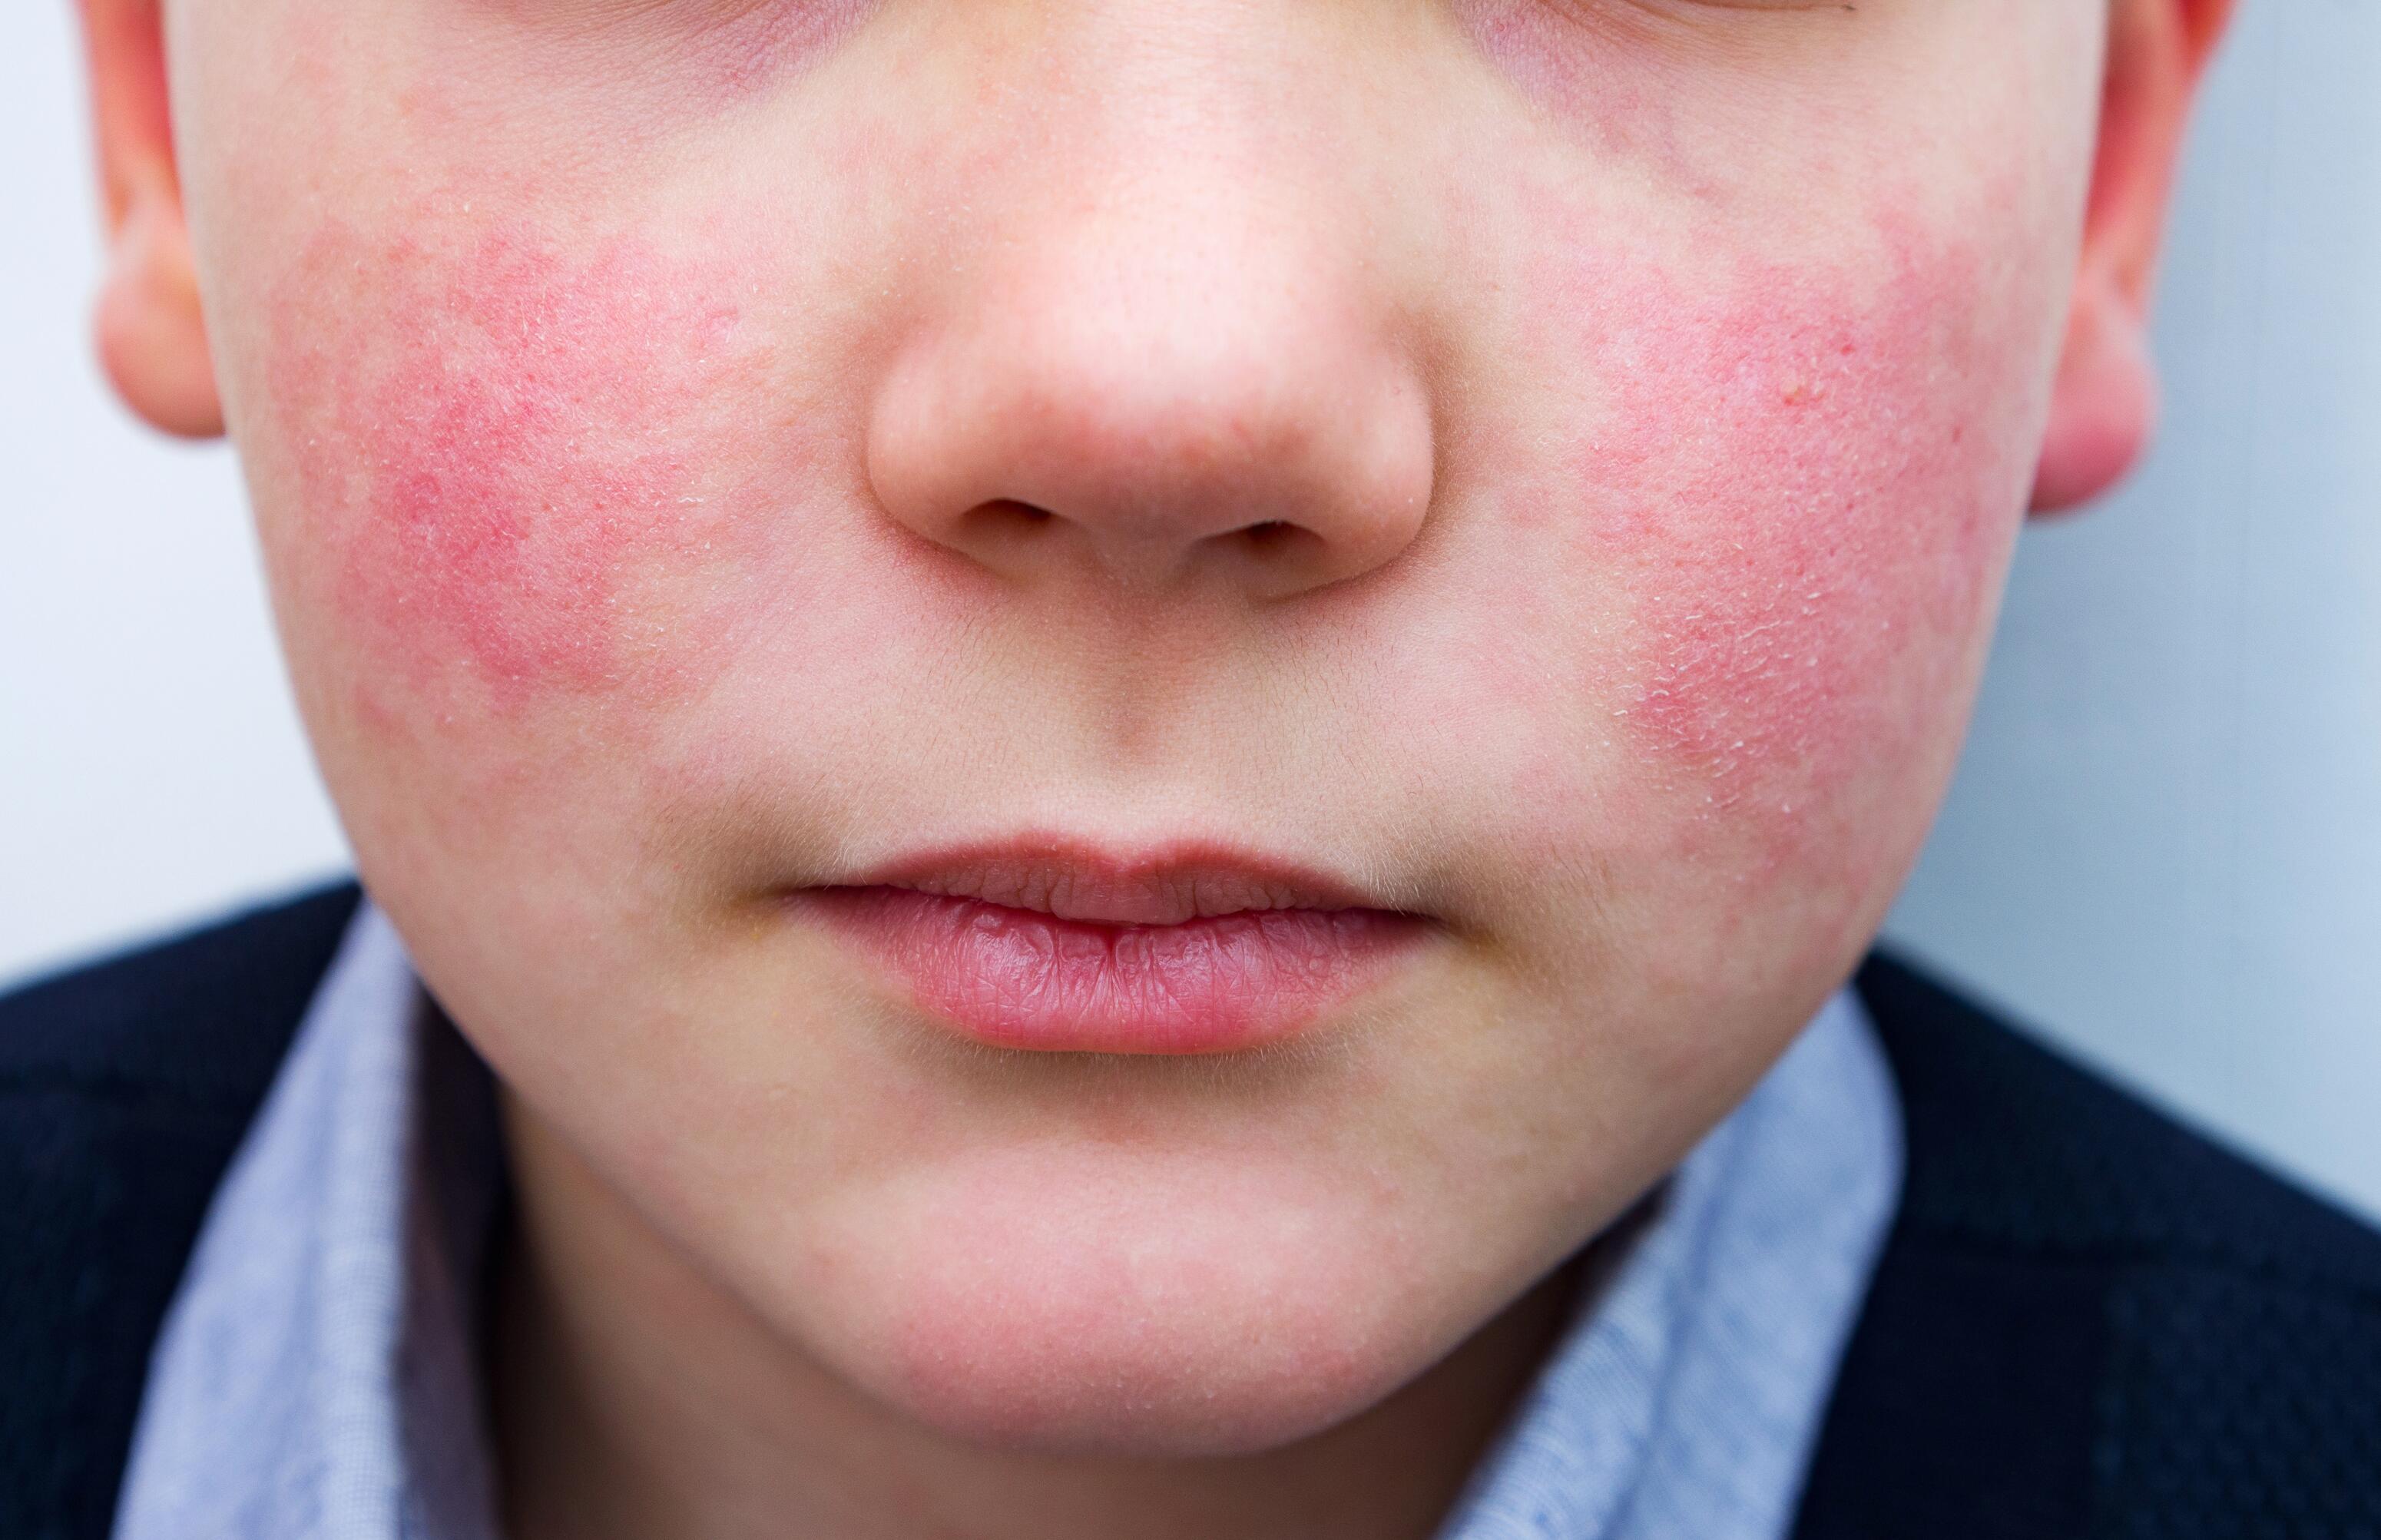 Child with psoriasis on the face